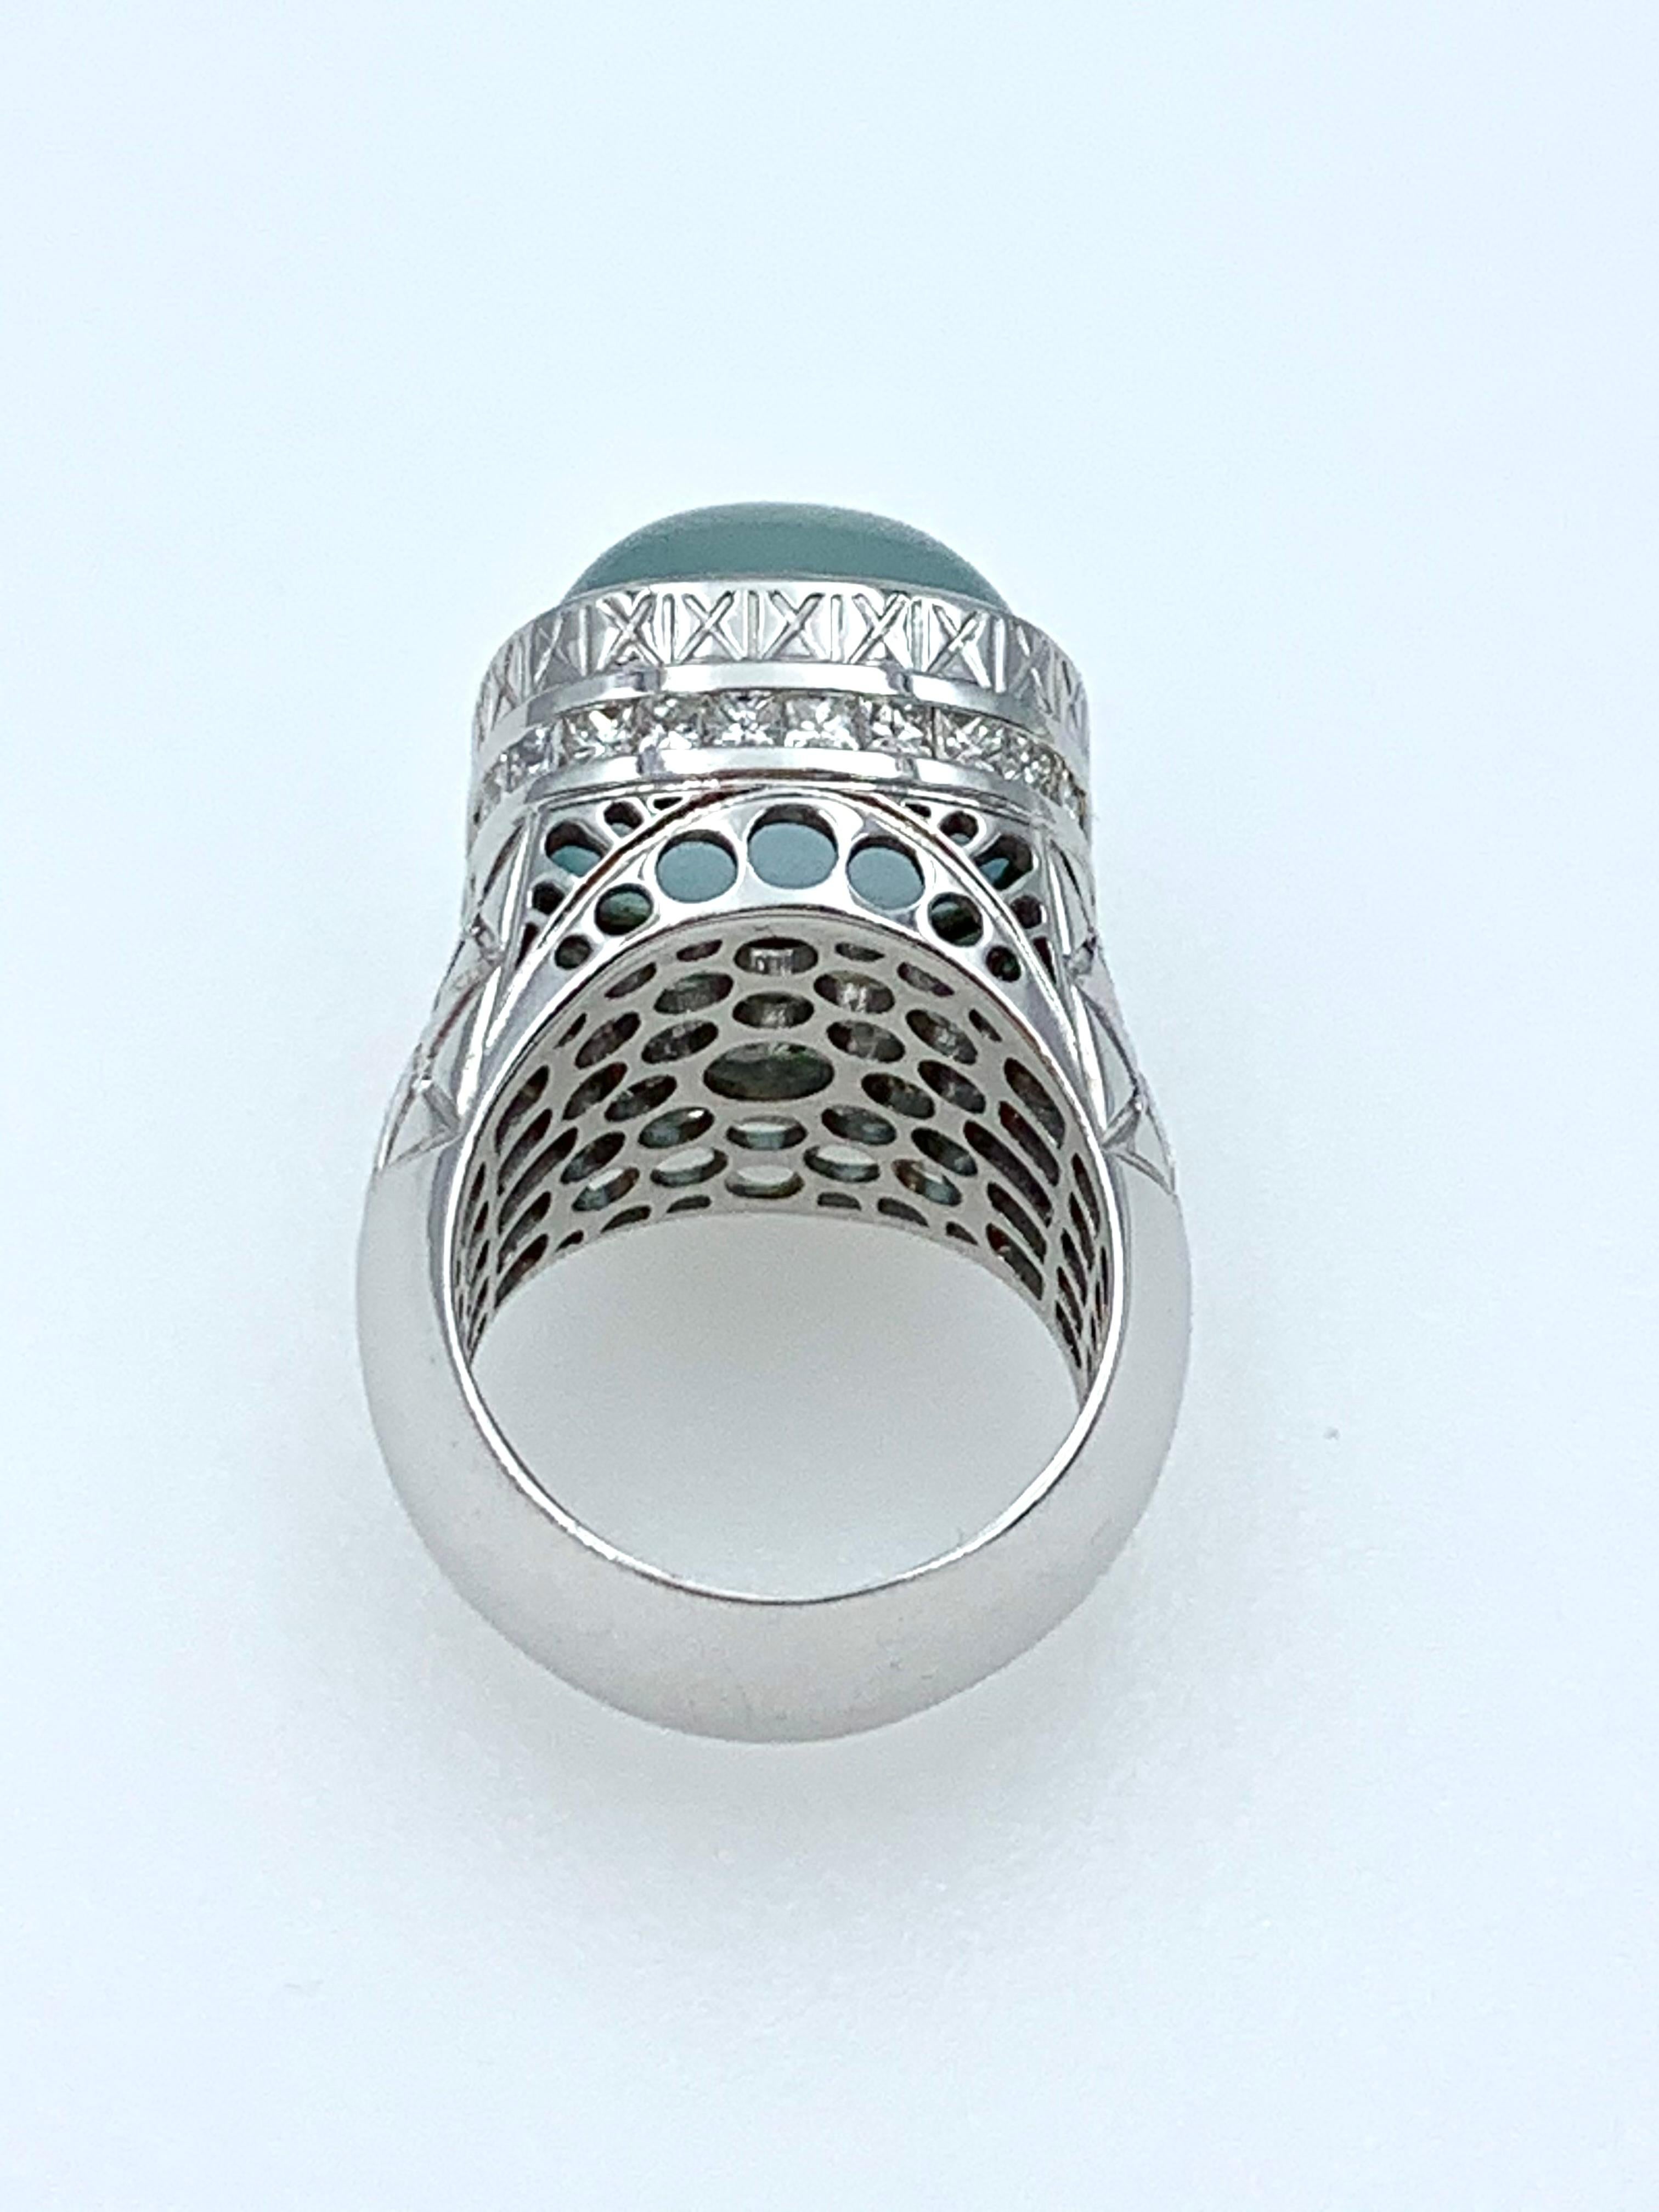 Contemporary White Gold Aquamarine Cabochon and Diamonds Eiffel Cocktail Ring For Sale